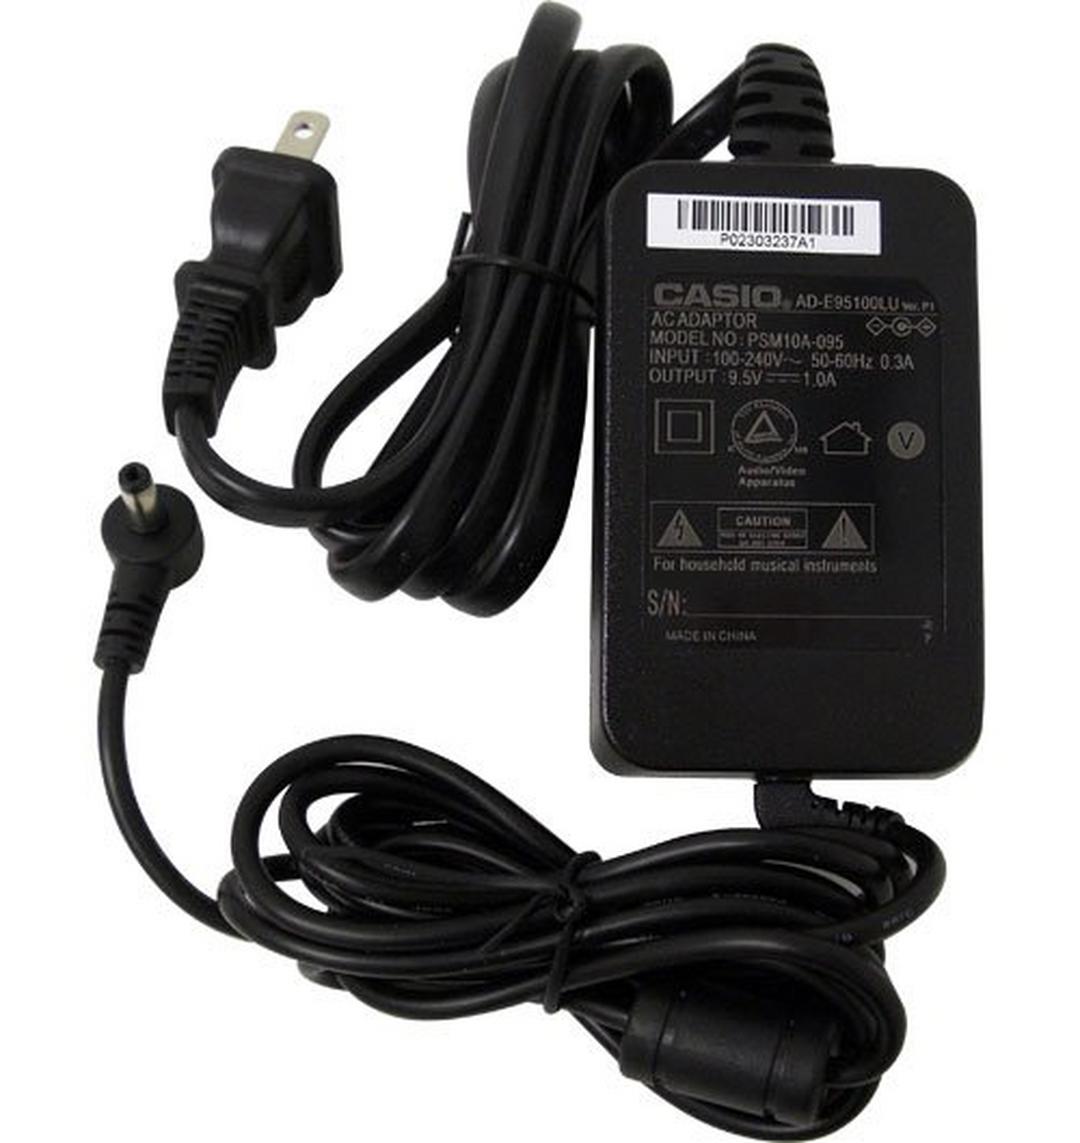 Casio AD-E95100 9.5V AC Power Adapter for Casio Keyboards